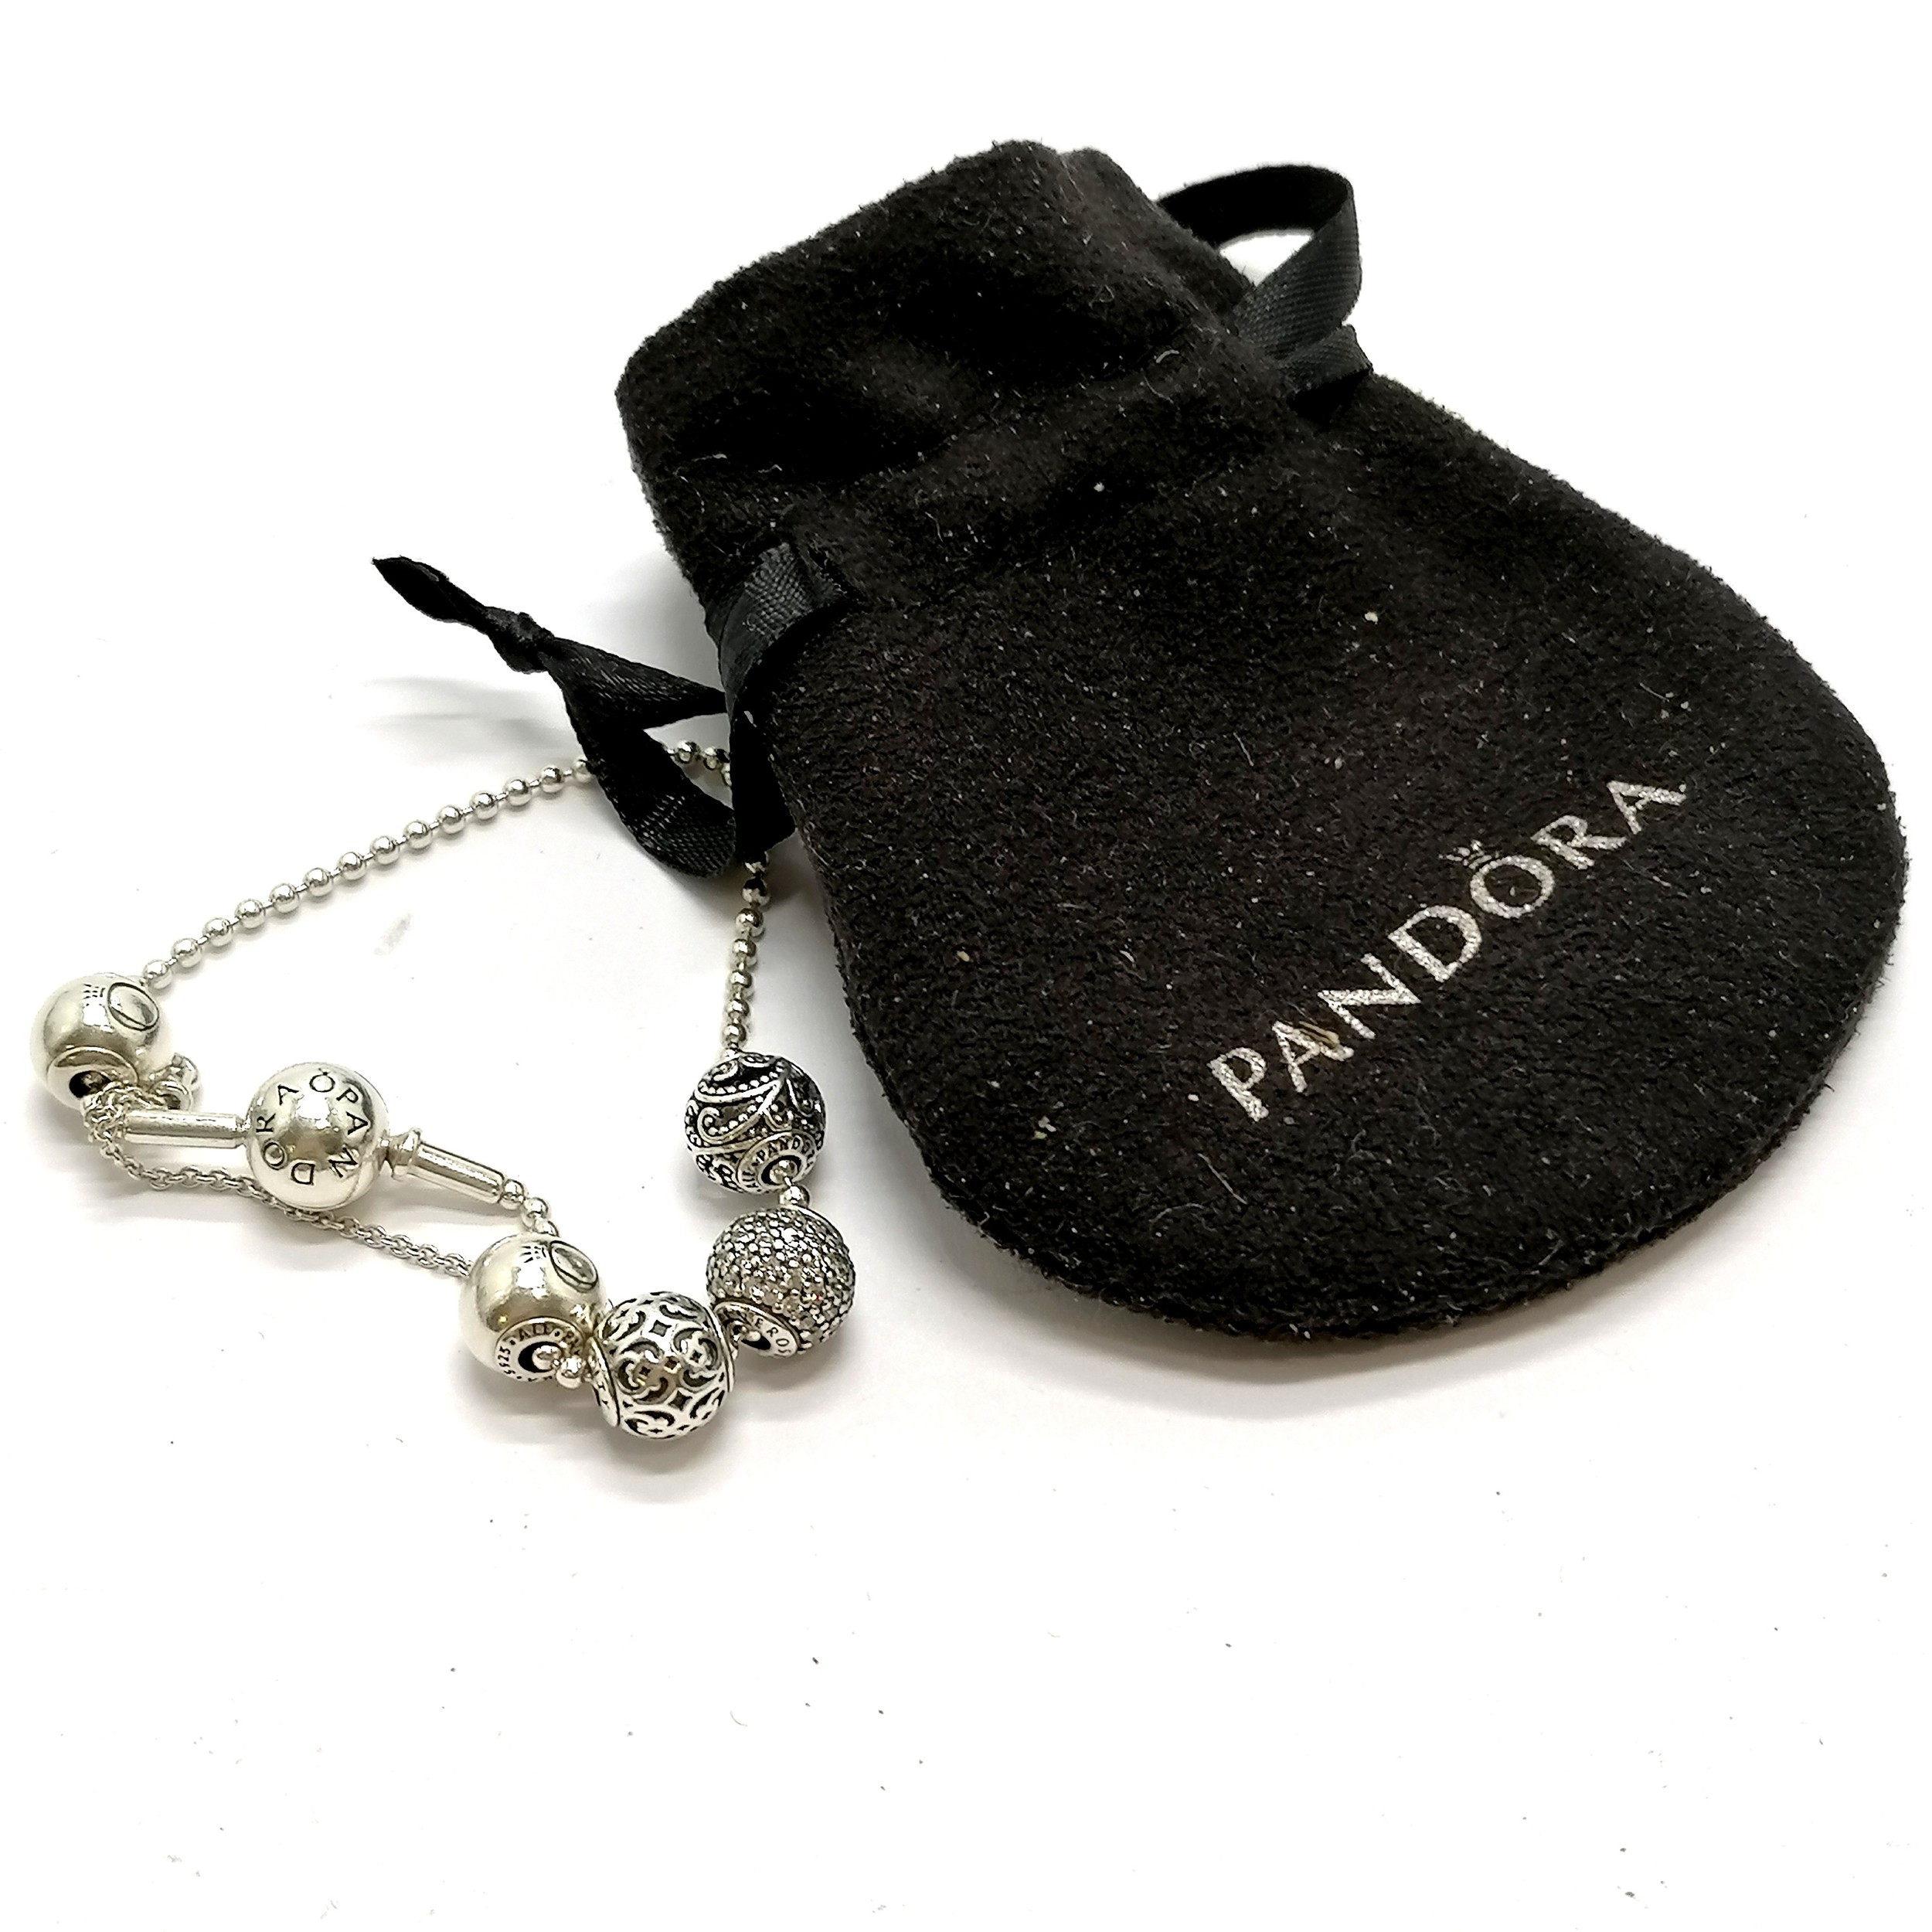 Pandora silver bracelet with 5 Pandora beads - 15.6g - SOLD ON BEHALF OF THE NEW BREAST CANCER - Image 2 of 2